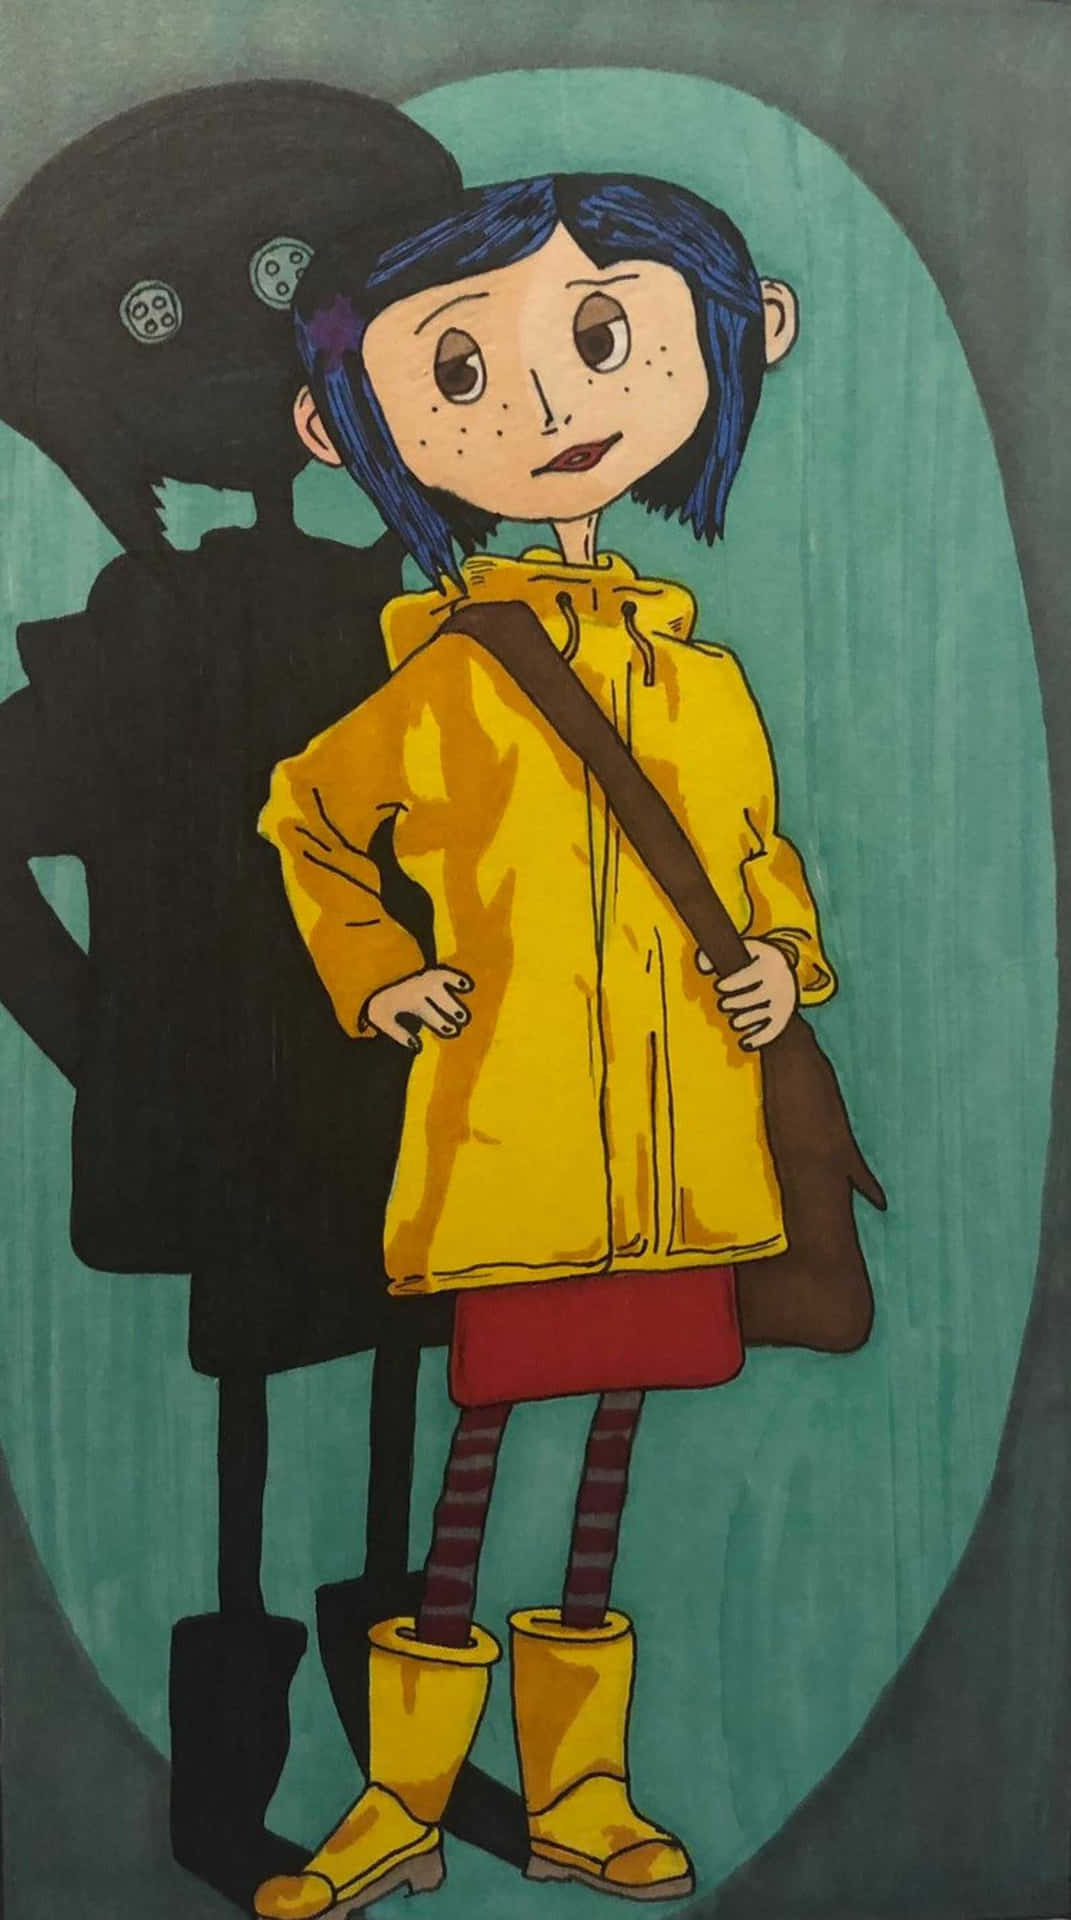 Follow Coraline on her adventures in her surreal world